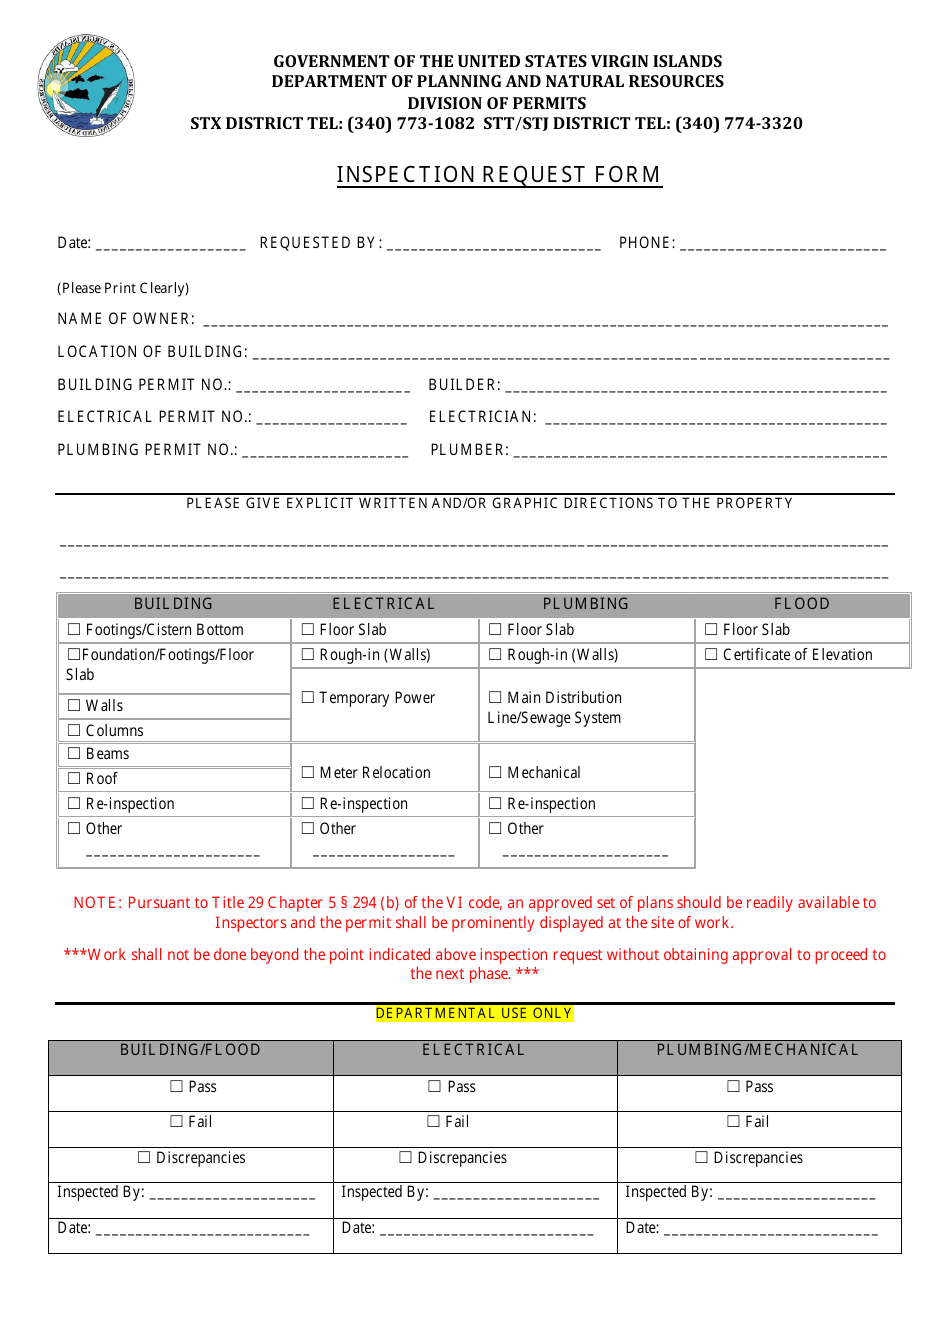 Inspection Request Form - Virgin Islands, Page 1